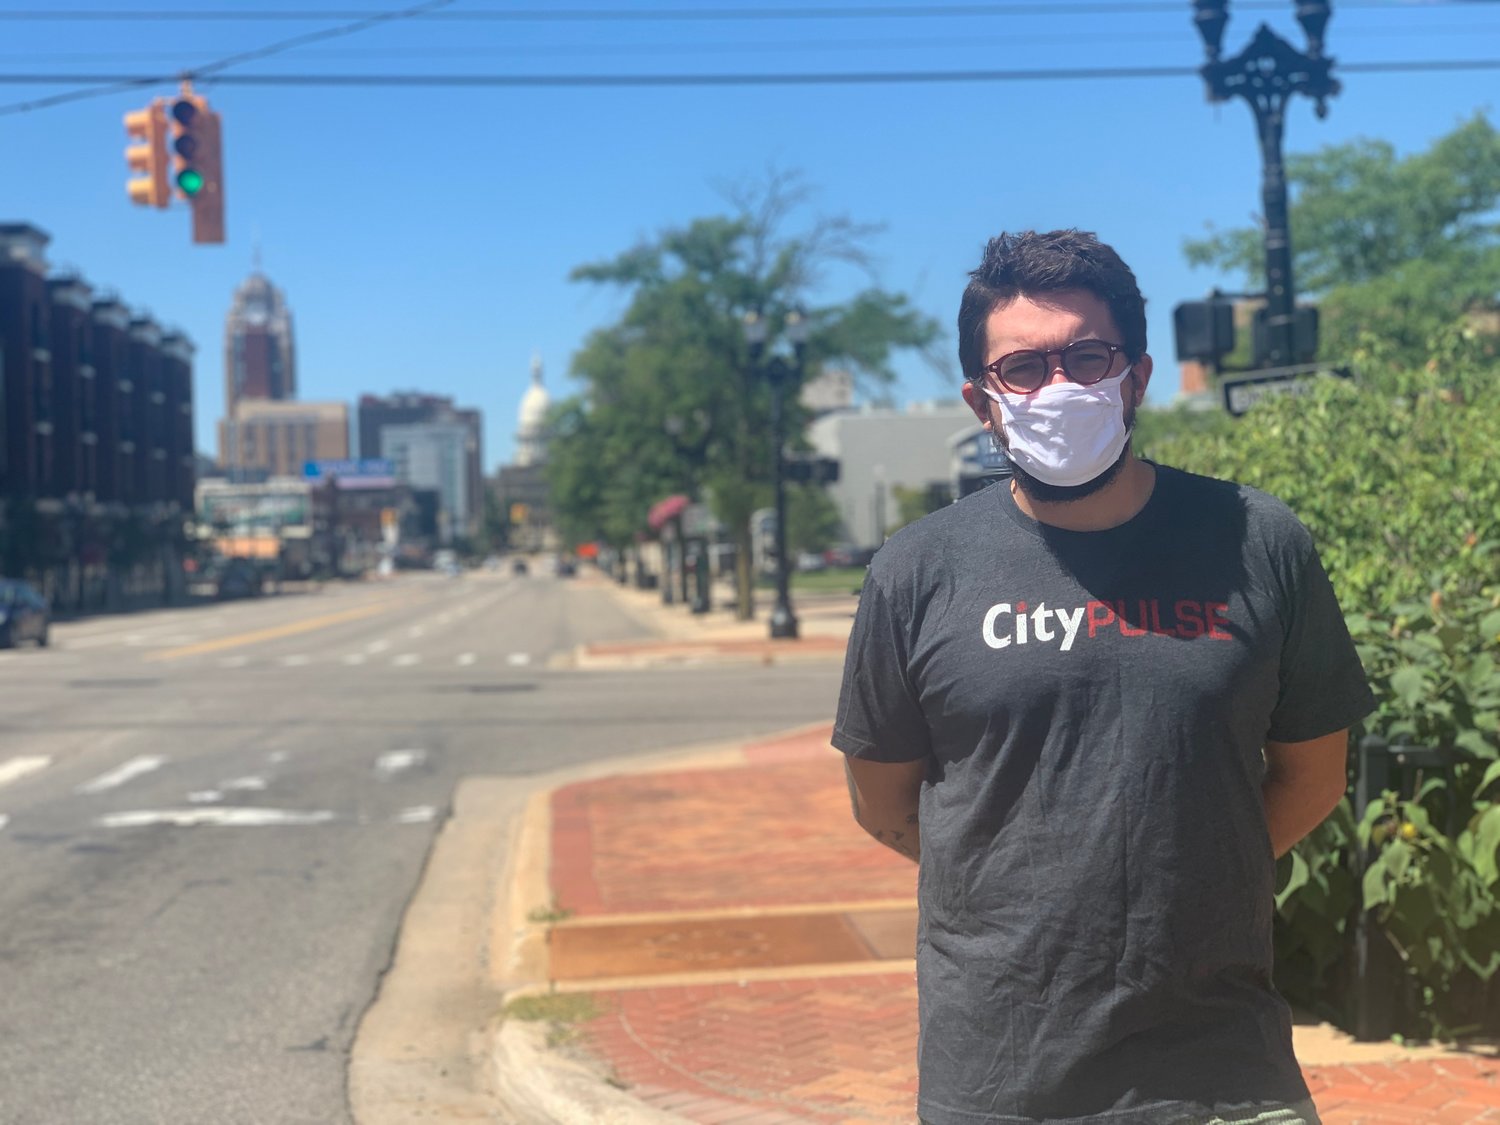 City Pulse staff member Kyle Kaminski near where his car was parked at Michigan Avenue and Larch Street in downtown Lansing.